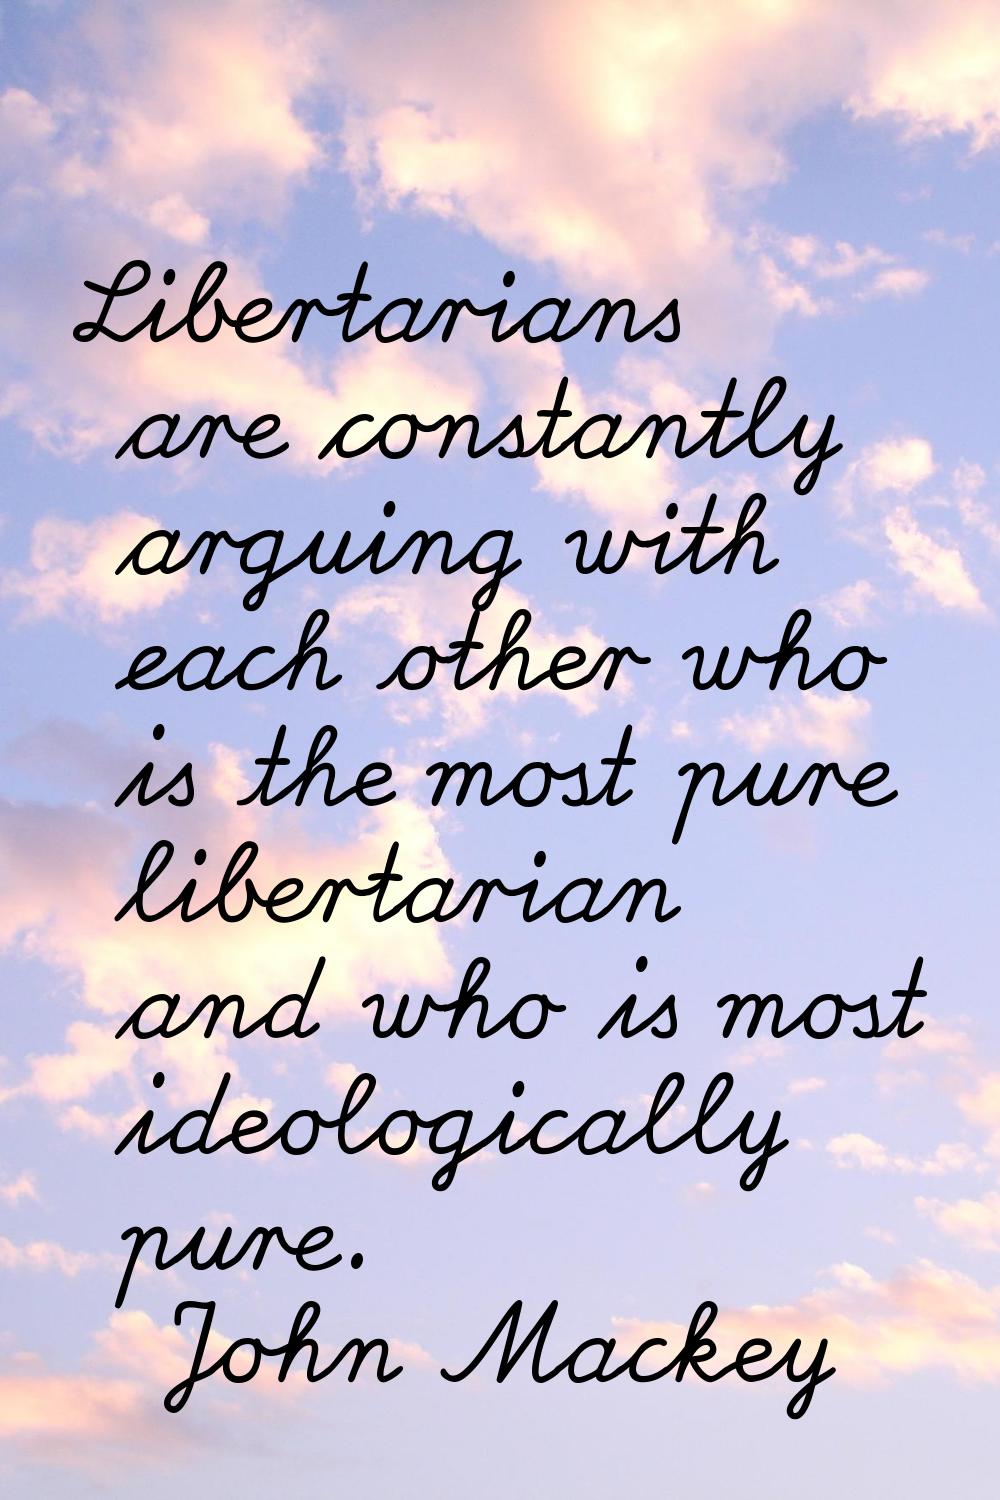 Libertarians are constantly arguing with each other who is the most pure libertarian and who is mos